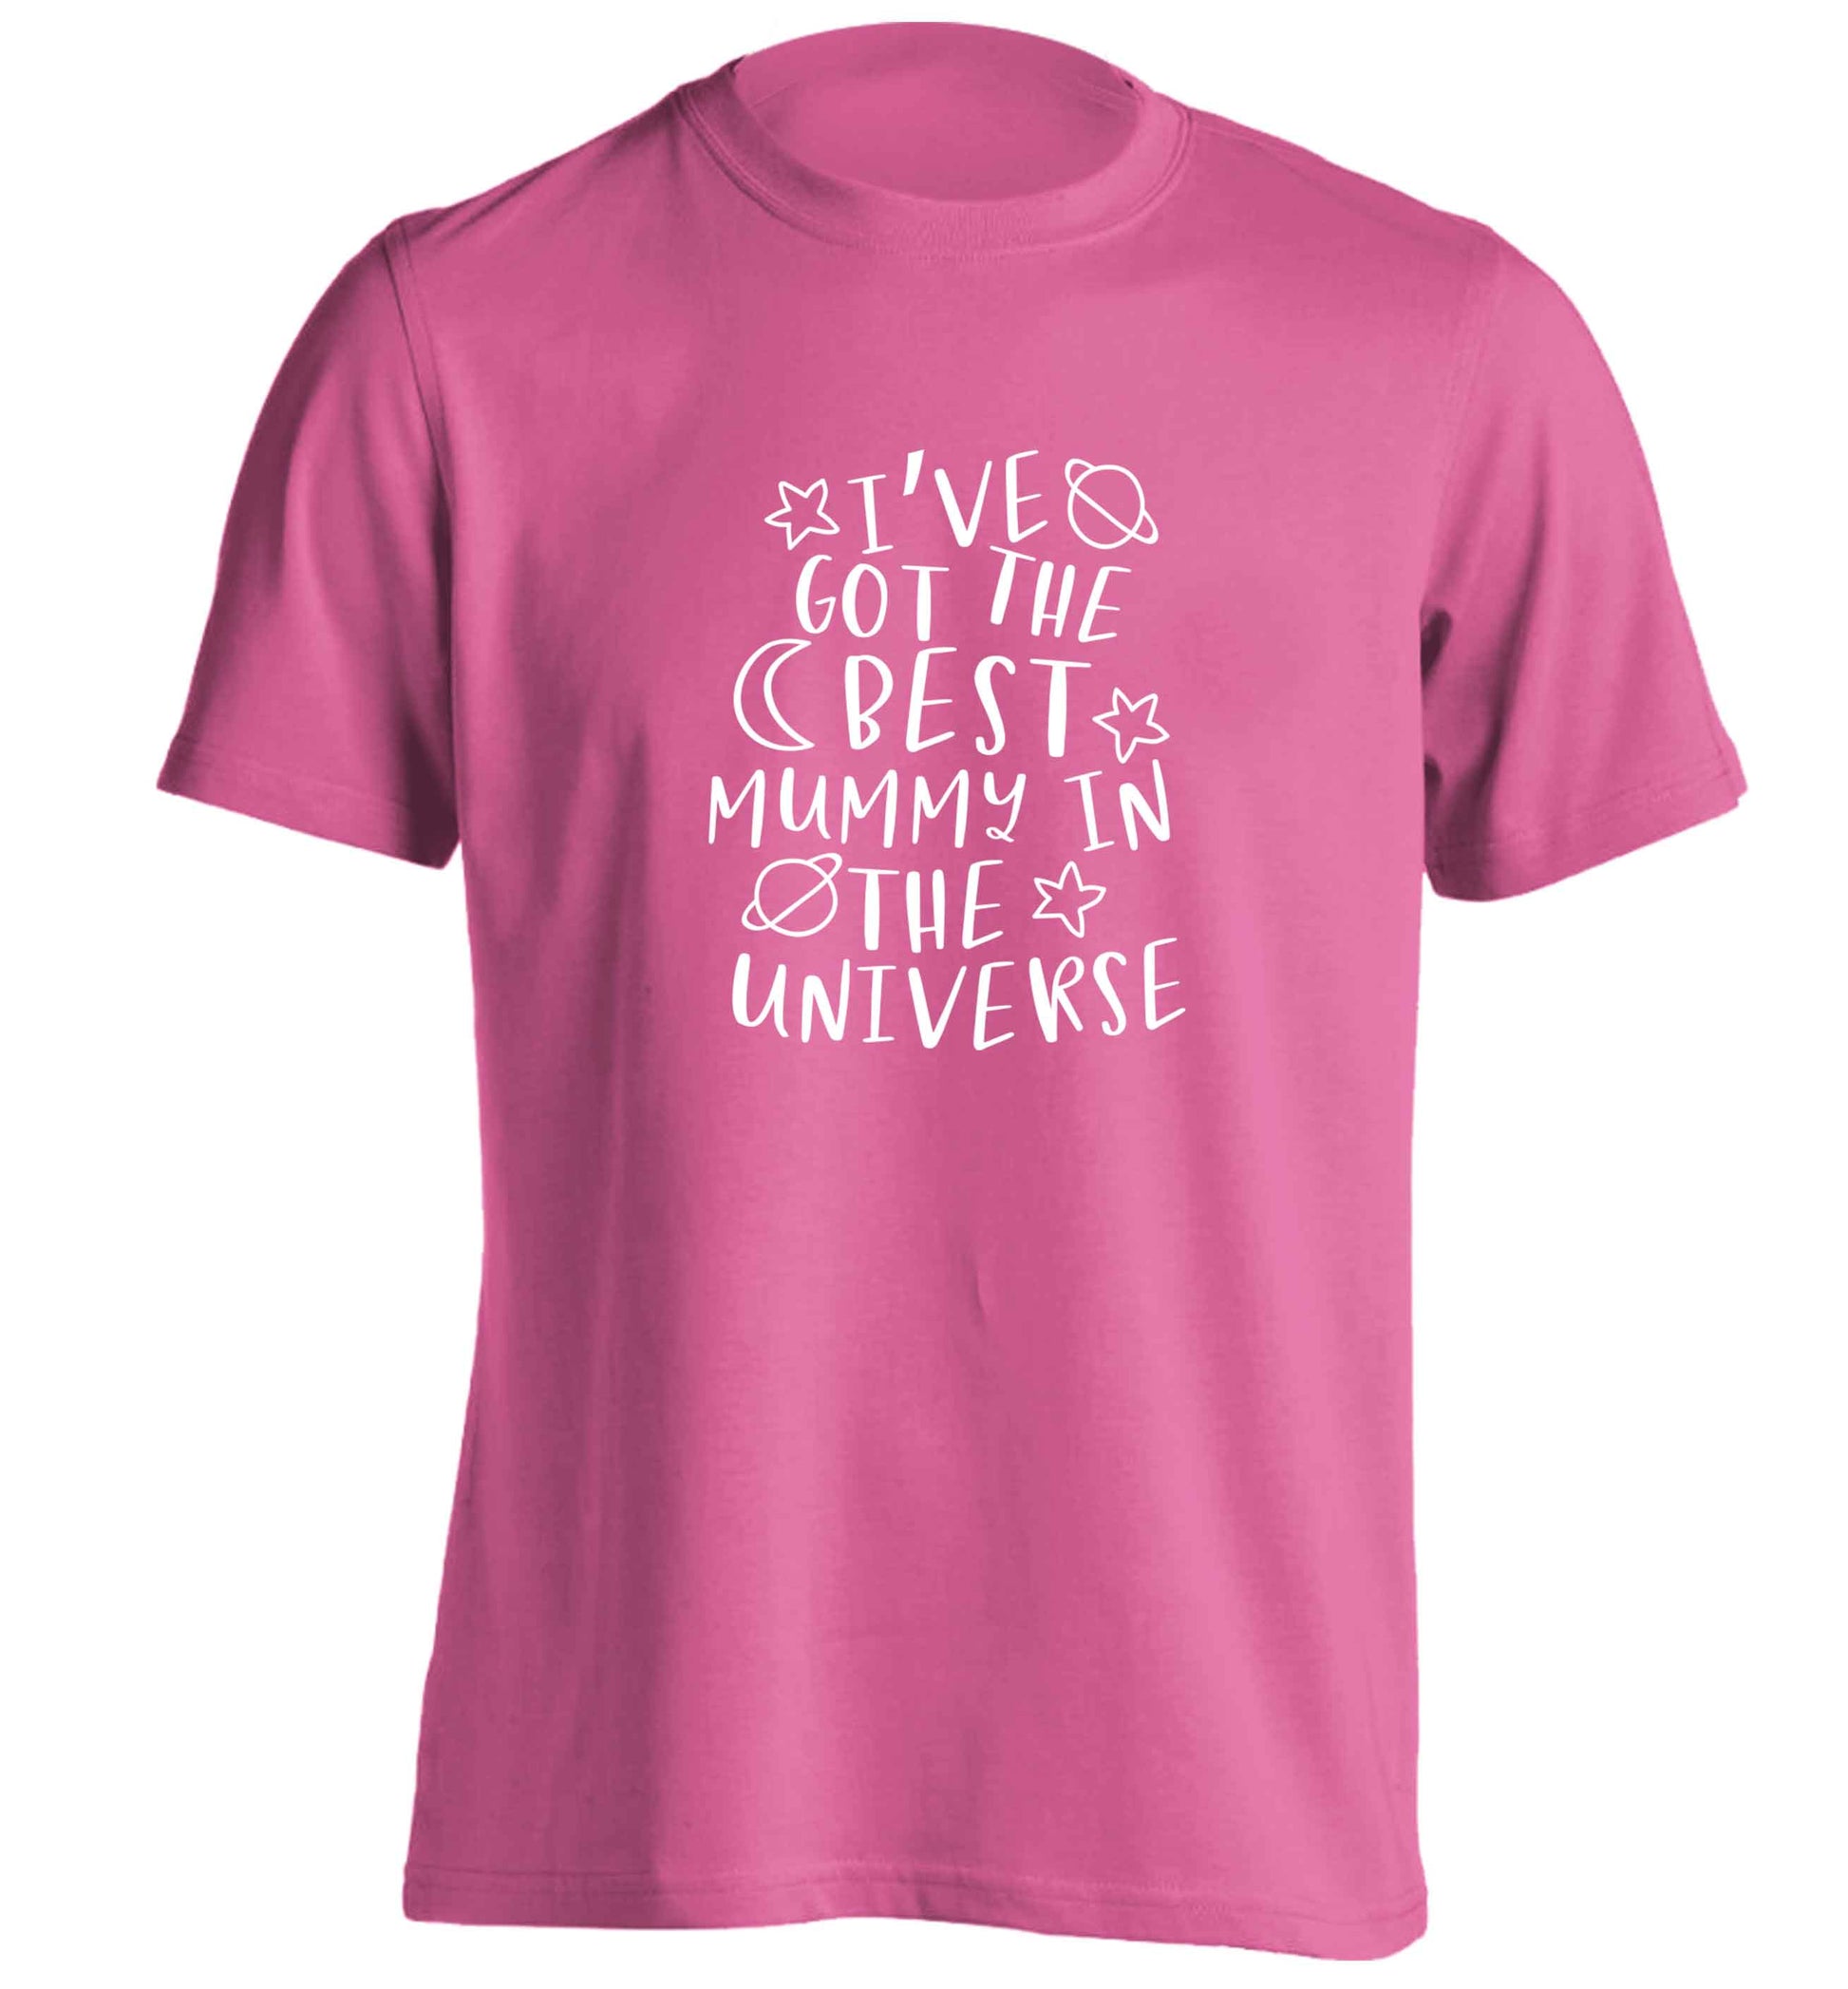 I've got the best mummy in the universe adults unisex pink Tshirt 2XL